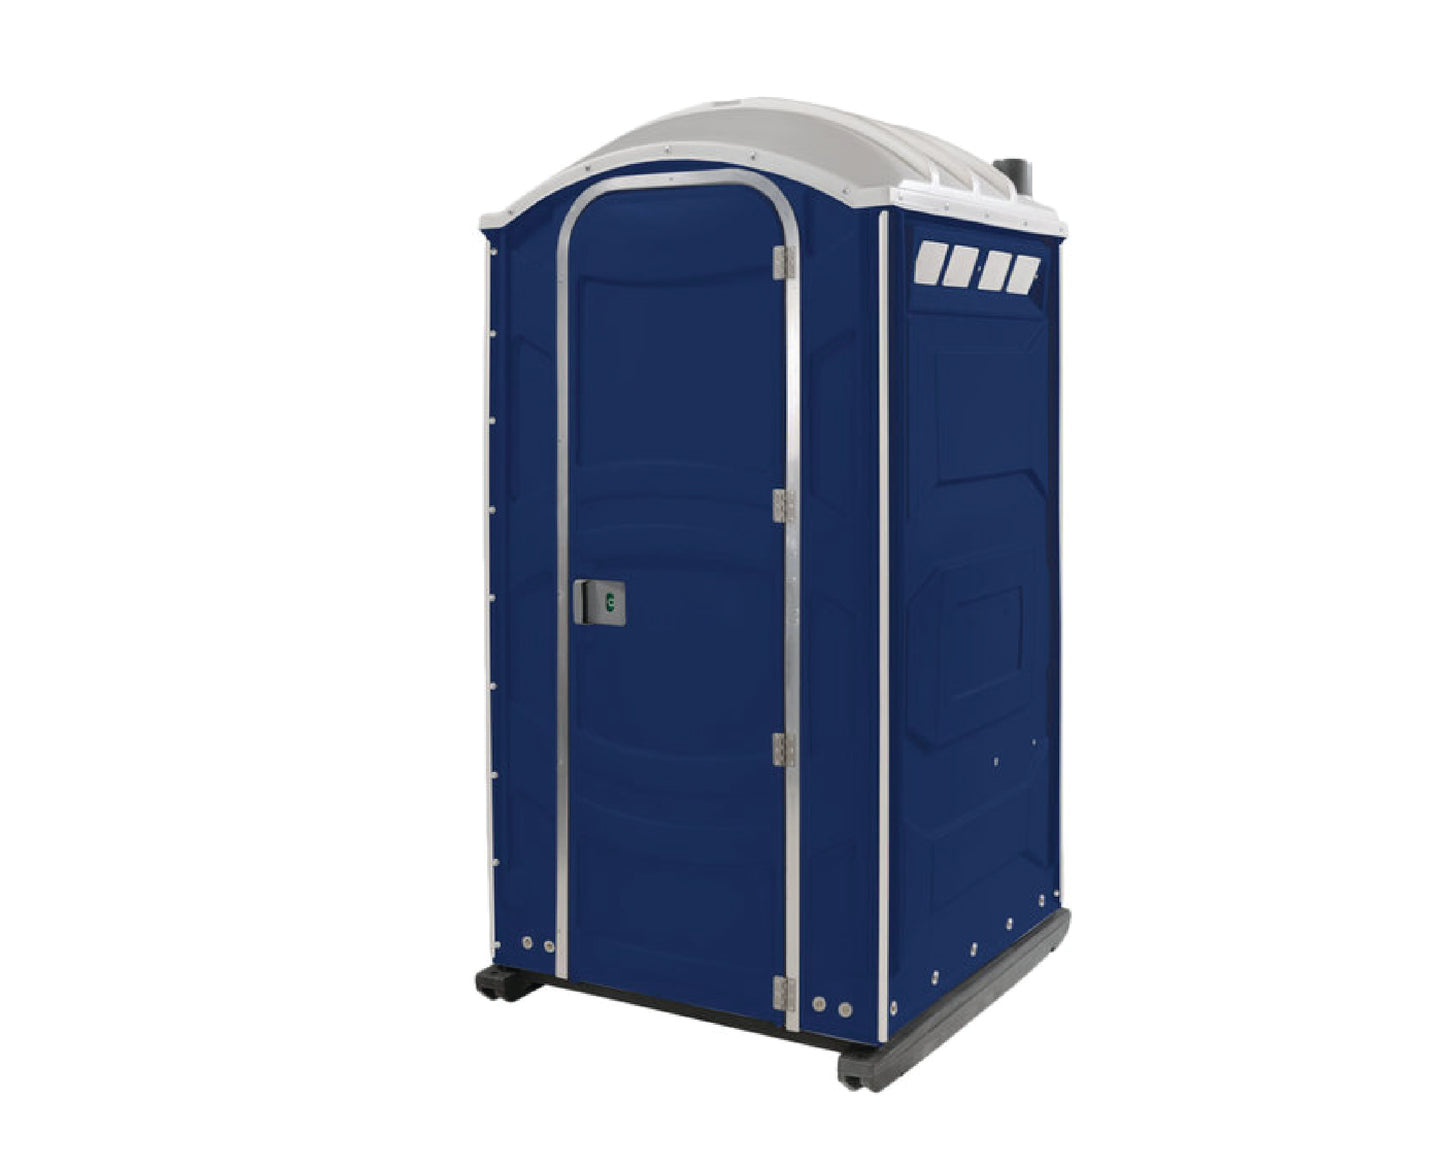 A flushable porta potty rental showcasing its hygienic design and eco-friendly features for a comfortable and clean experience.